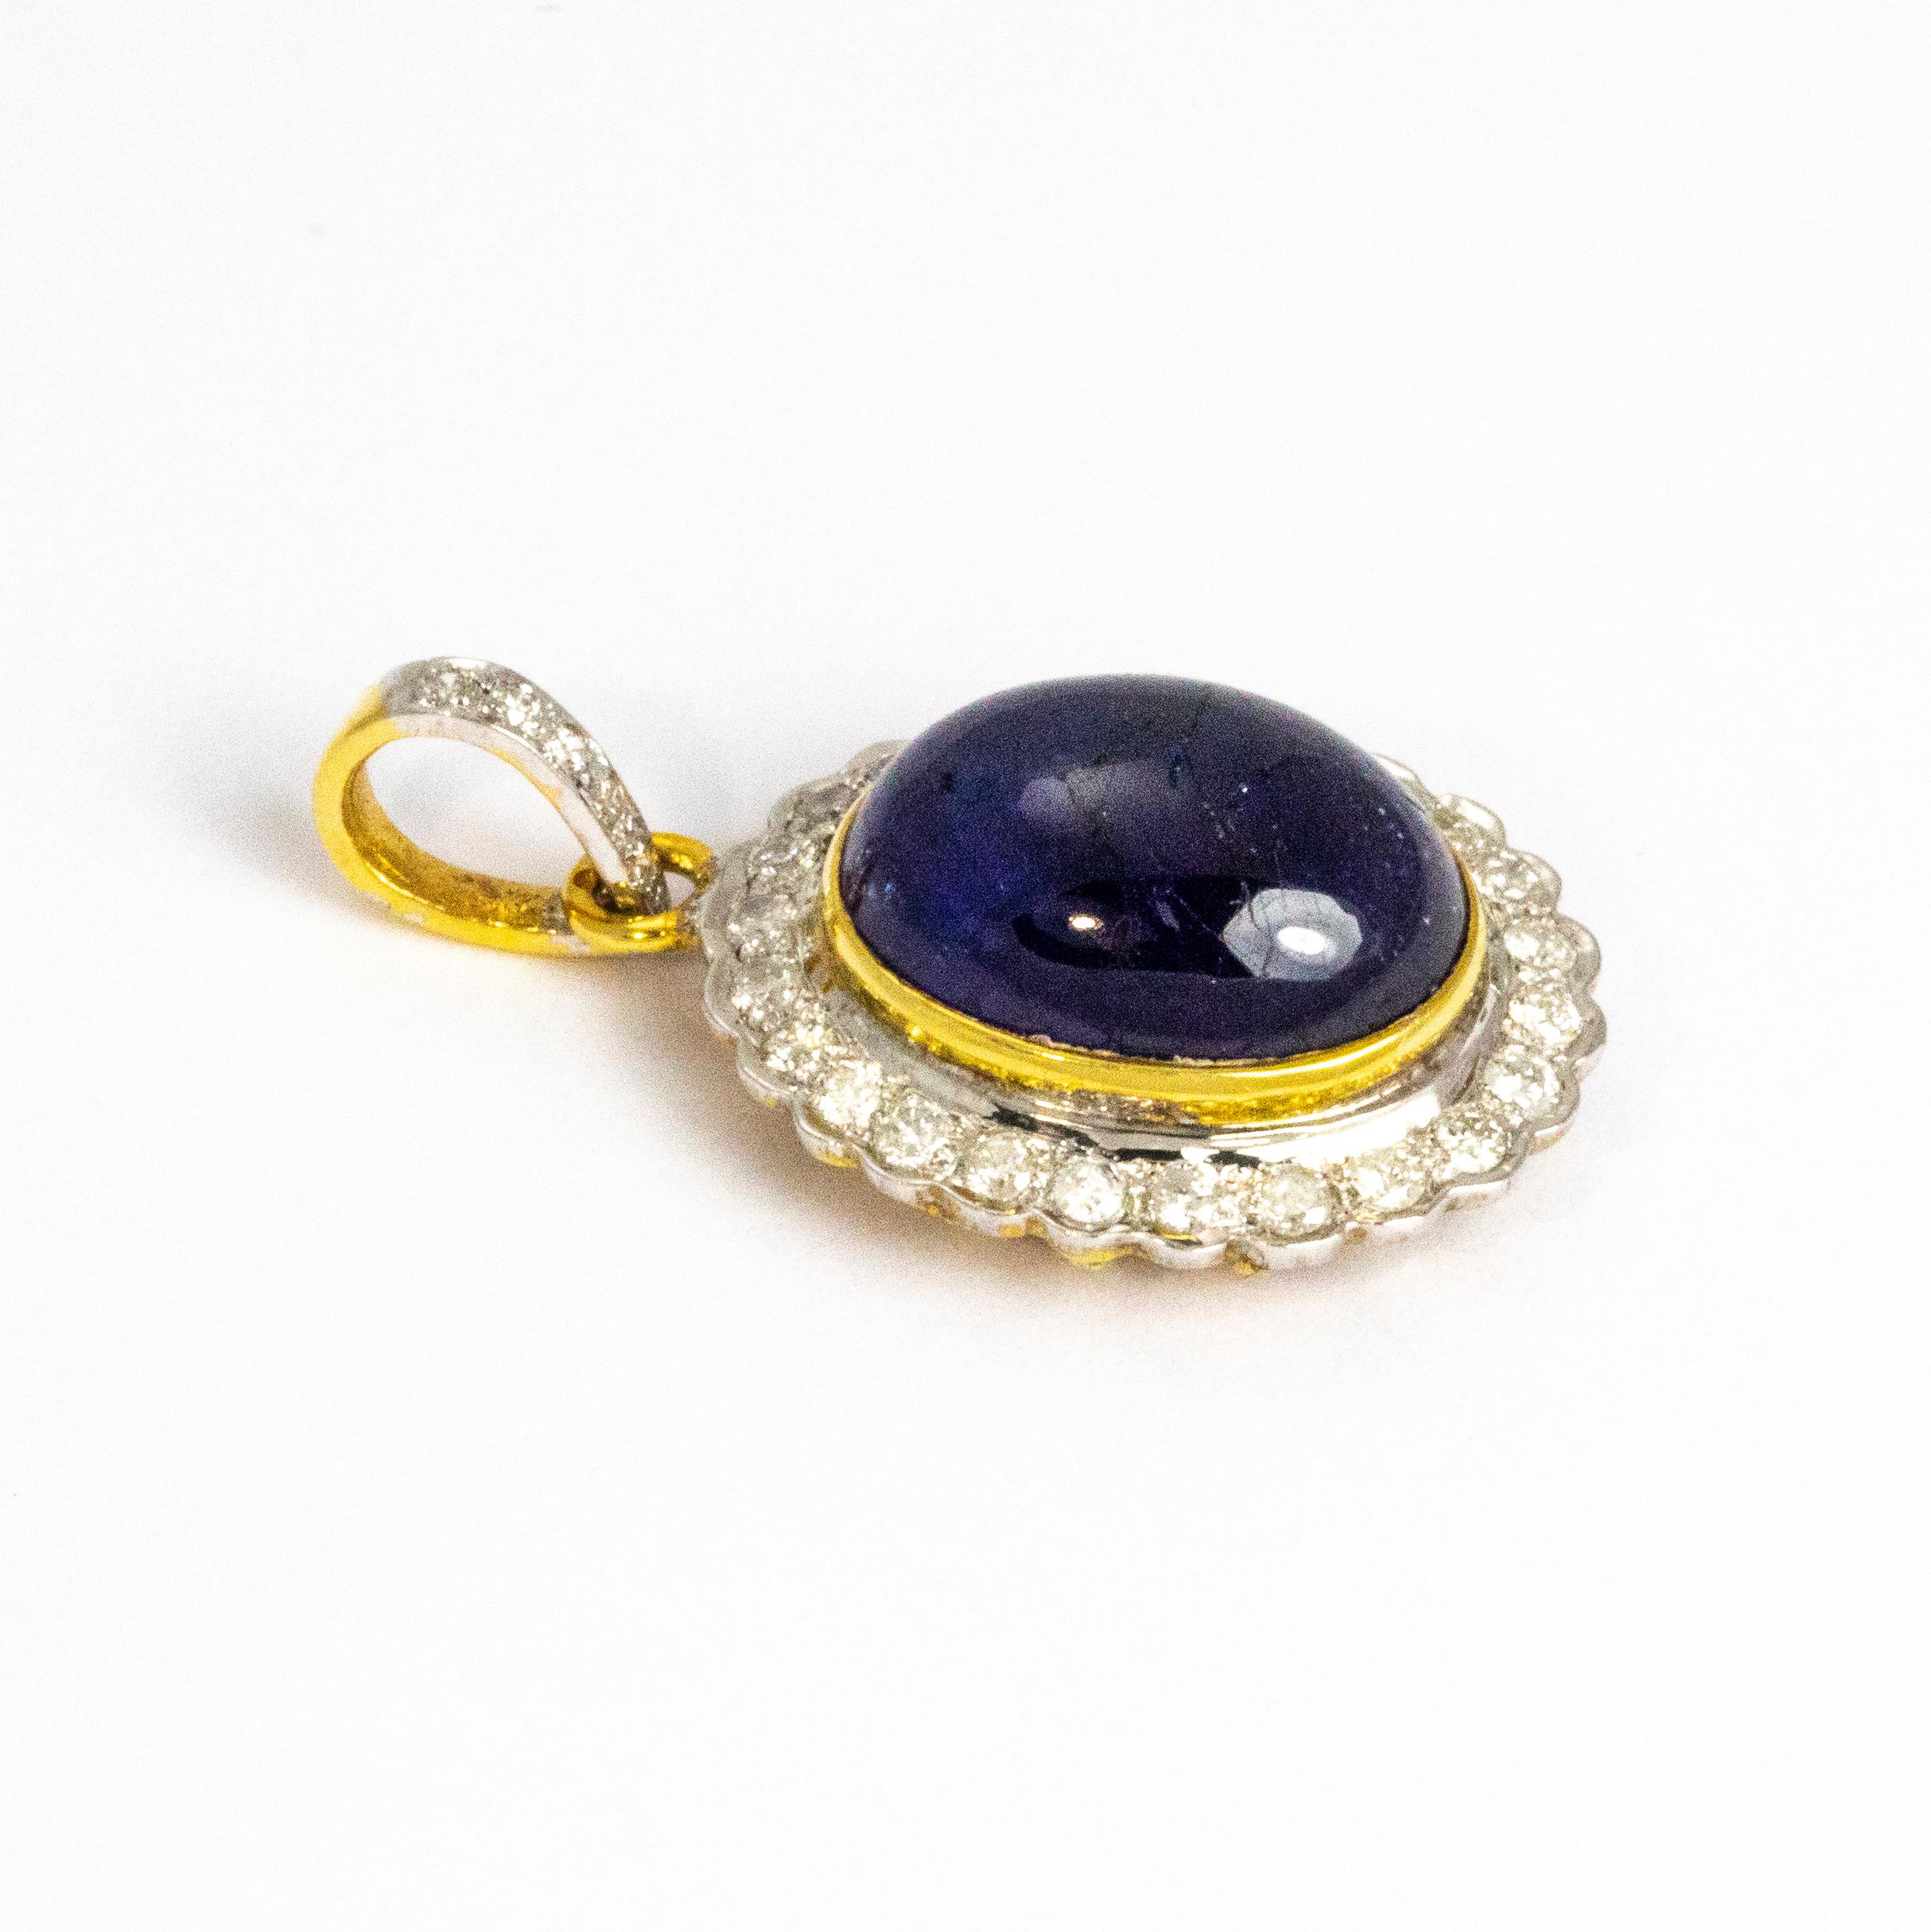 Sparkling diamonds surround a glossy deep blue Cabochon and is all set in 18ct gold. The back of this pendant is almost as beautiful as the front and even the loop at the top of the pendant holds tiny glittering diamonds, a piece bursting with